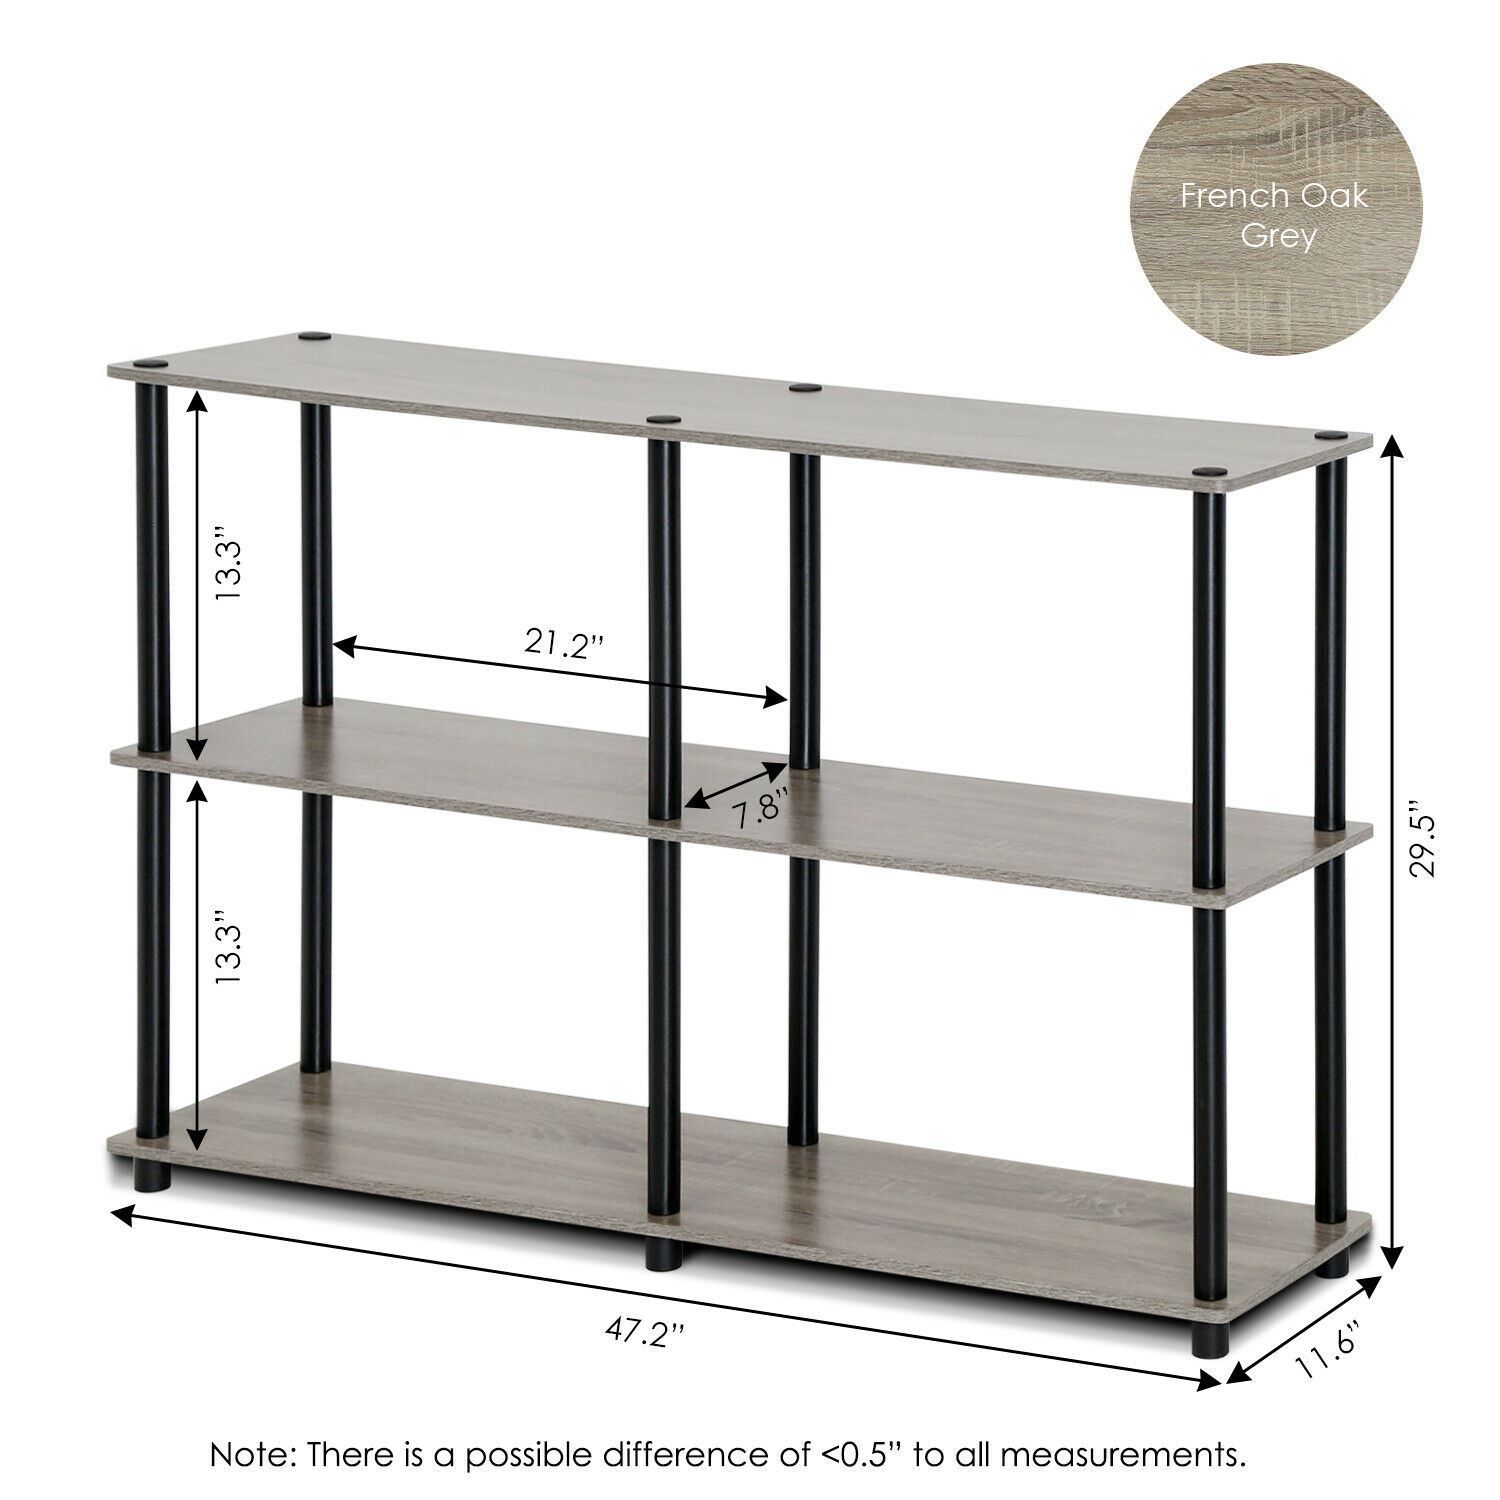 - Furinno Turn-N-Tube Series storage shelves comes in 2-3-4-5-Tiers and variety of width and depth.
- This series is designed to meet the demand of fits in space, fits on budget and yet durable and efficient furniture.
- It is proven to be the most popular RTA furniture due to its functionality, price, and the no hassle assembly. 
- Just turn the tube to connect the panels to form a storage shelf.
- Care instructions: Wipe clean with clean damped cloth. Avoid using harsh chemicals.